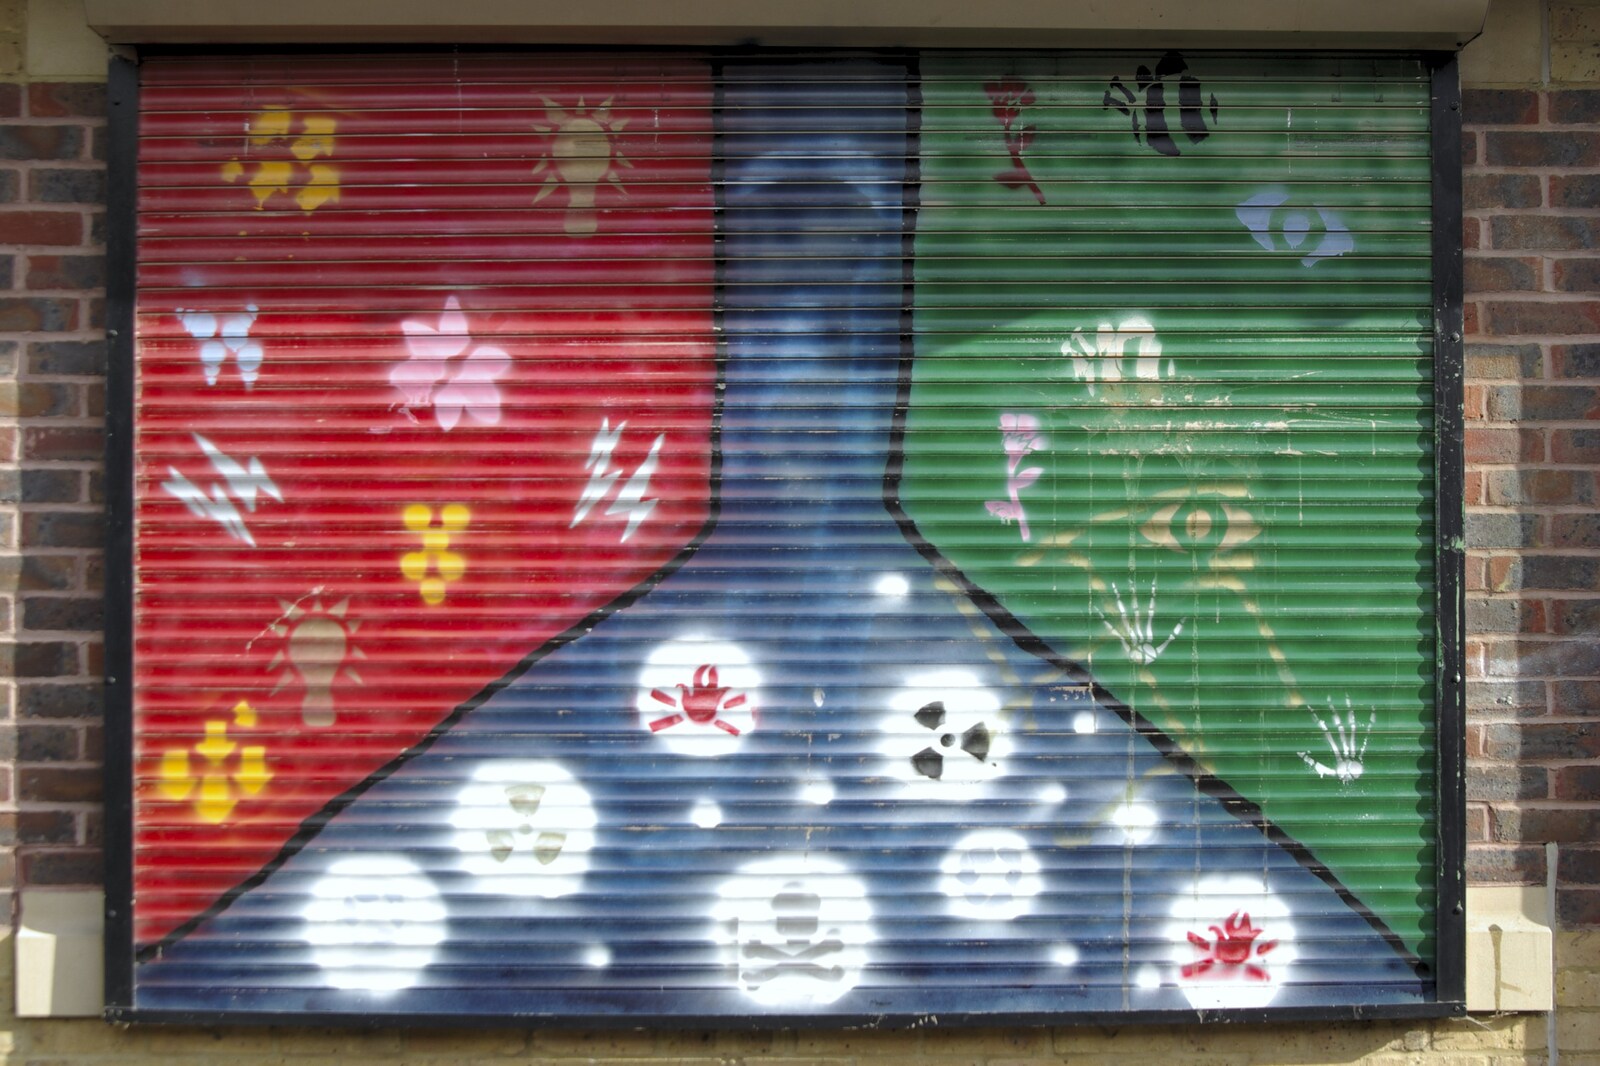 Graffiti in the style of the South African flag from The Derelict Salam Newsagents, Perne Road, Cambridge - 18th March 2007